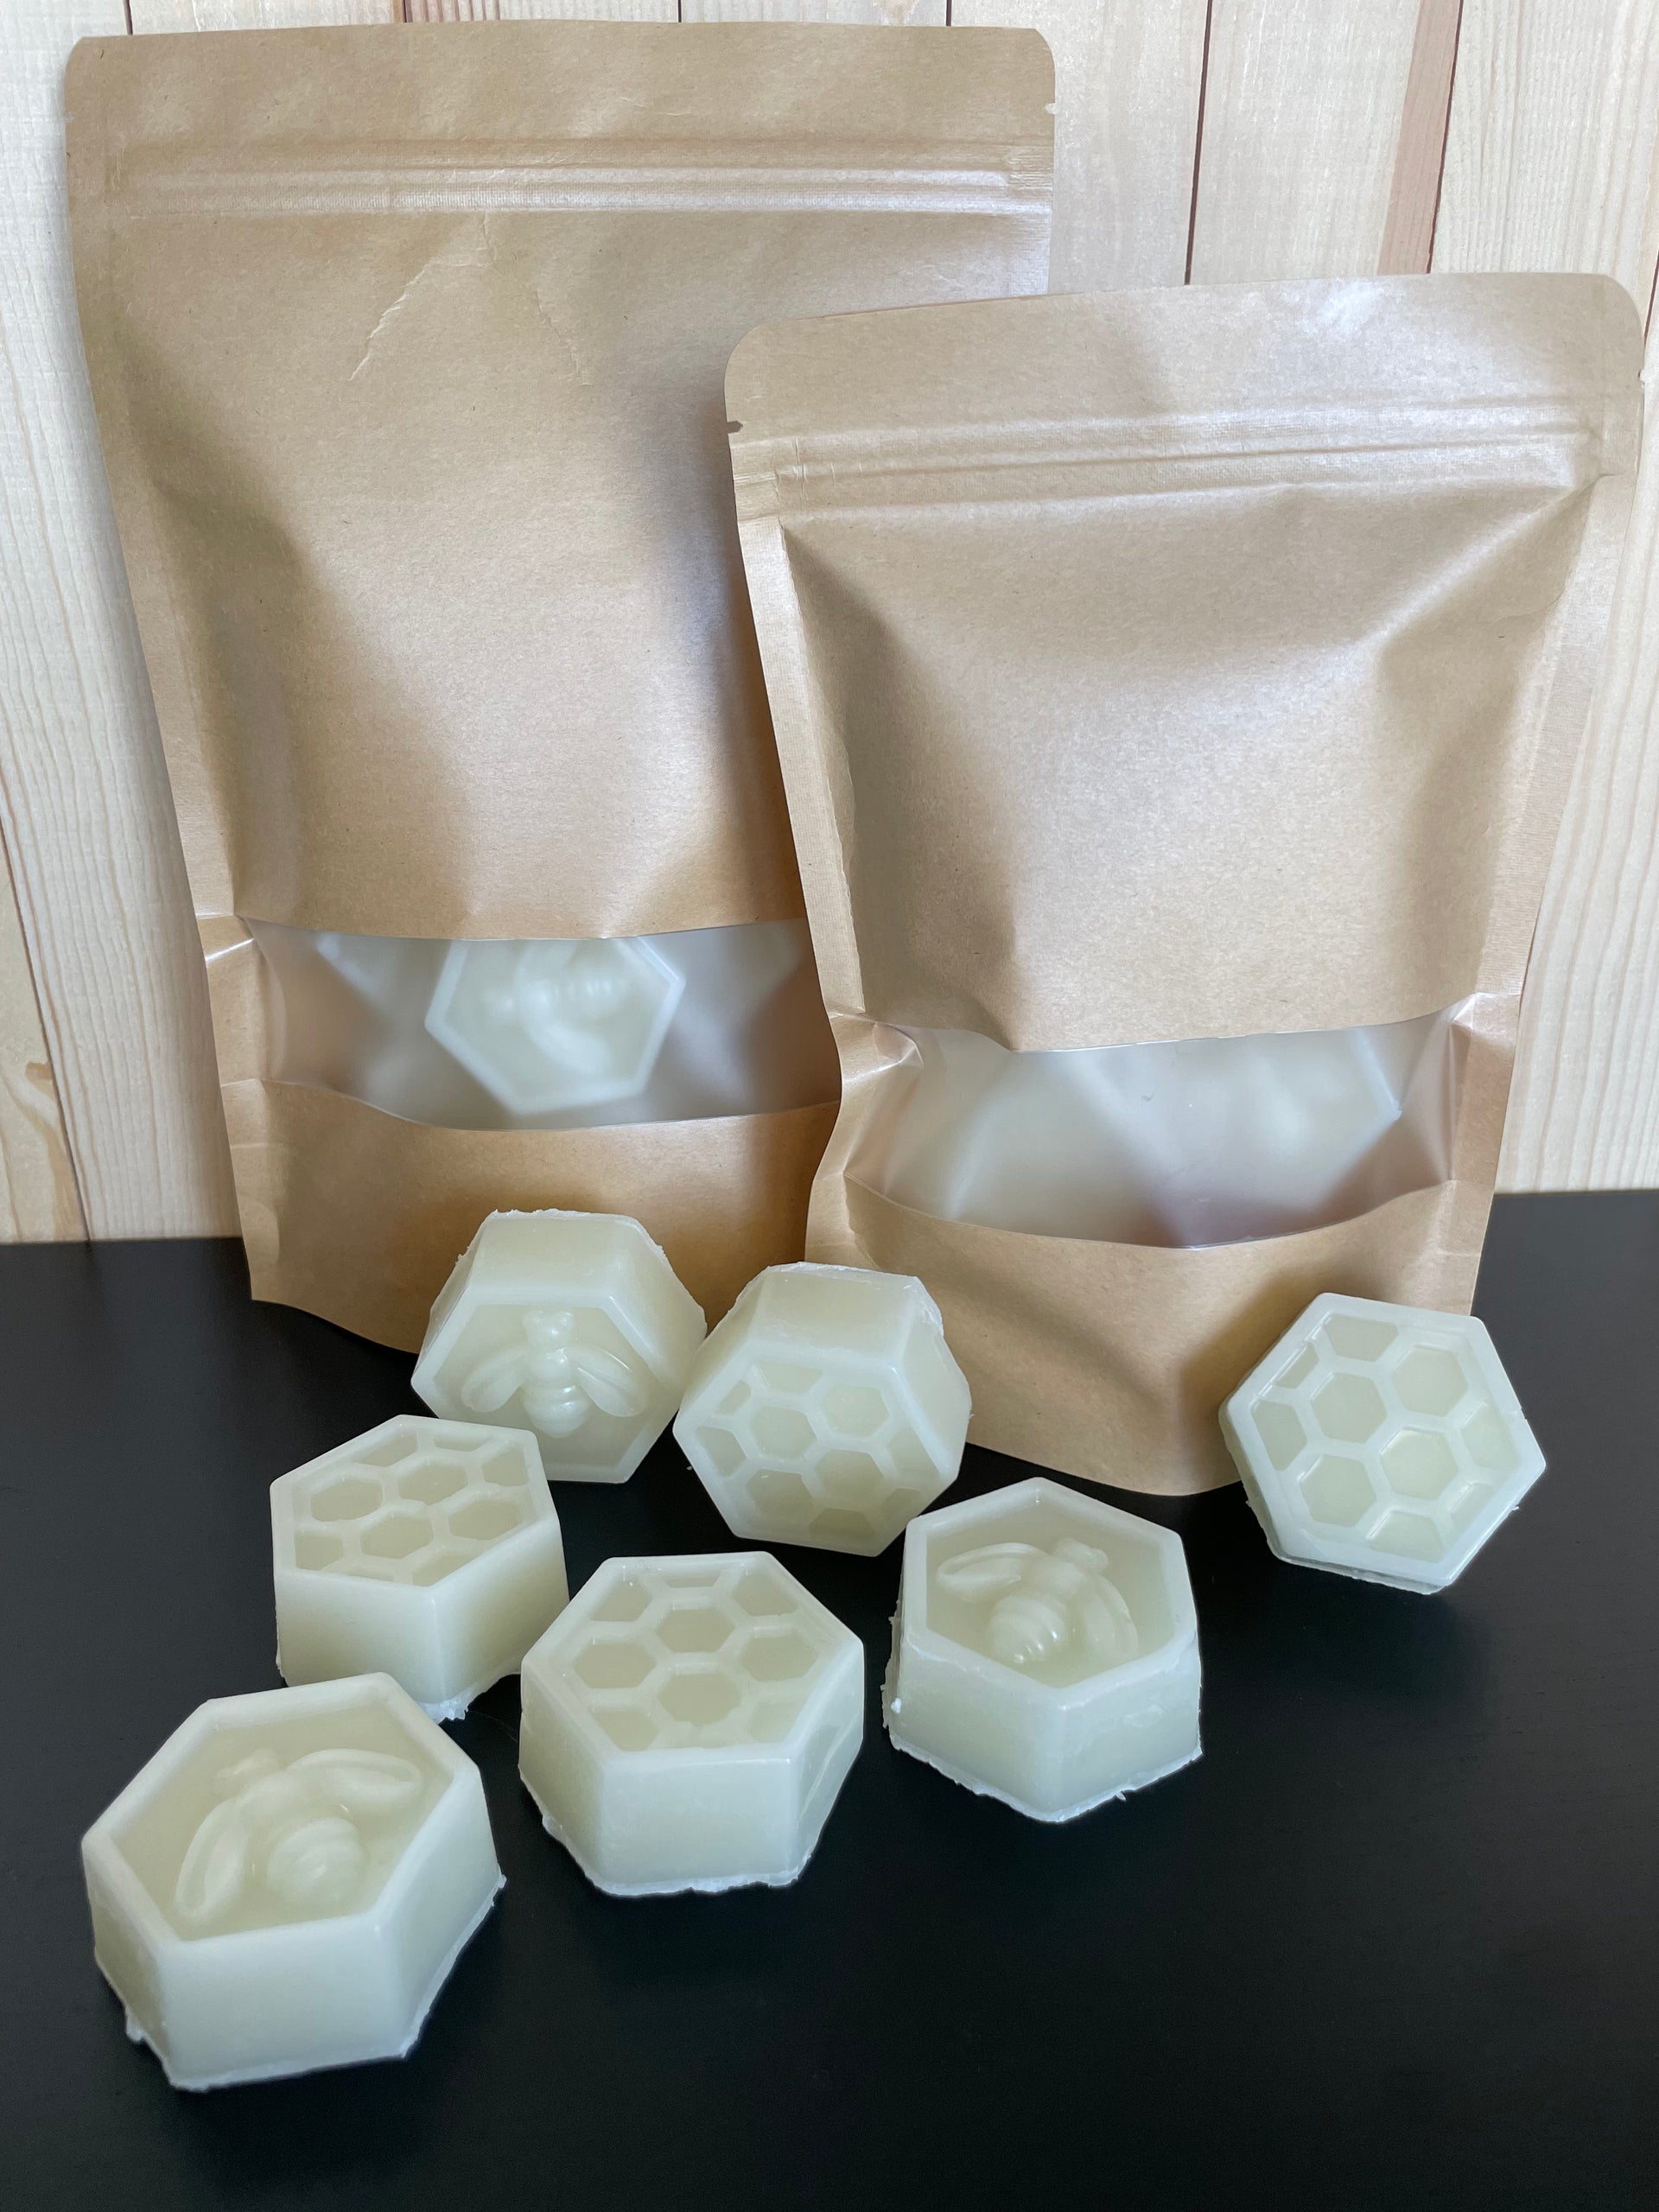 HONEY BUTTER SCENTED - Pure Beeswax Melts for Warmers, (1-PACK) Wild  Harvest Candle Company, 3 oz Beeswax Tarts Cubes, Hand Poured Made in USA,  Phthalate Free, Non Toxic – Wild Harvest Candle Company LLC